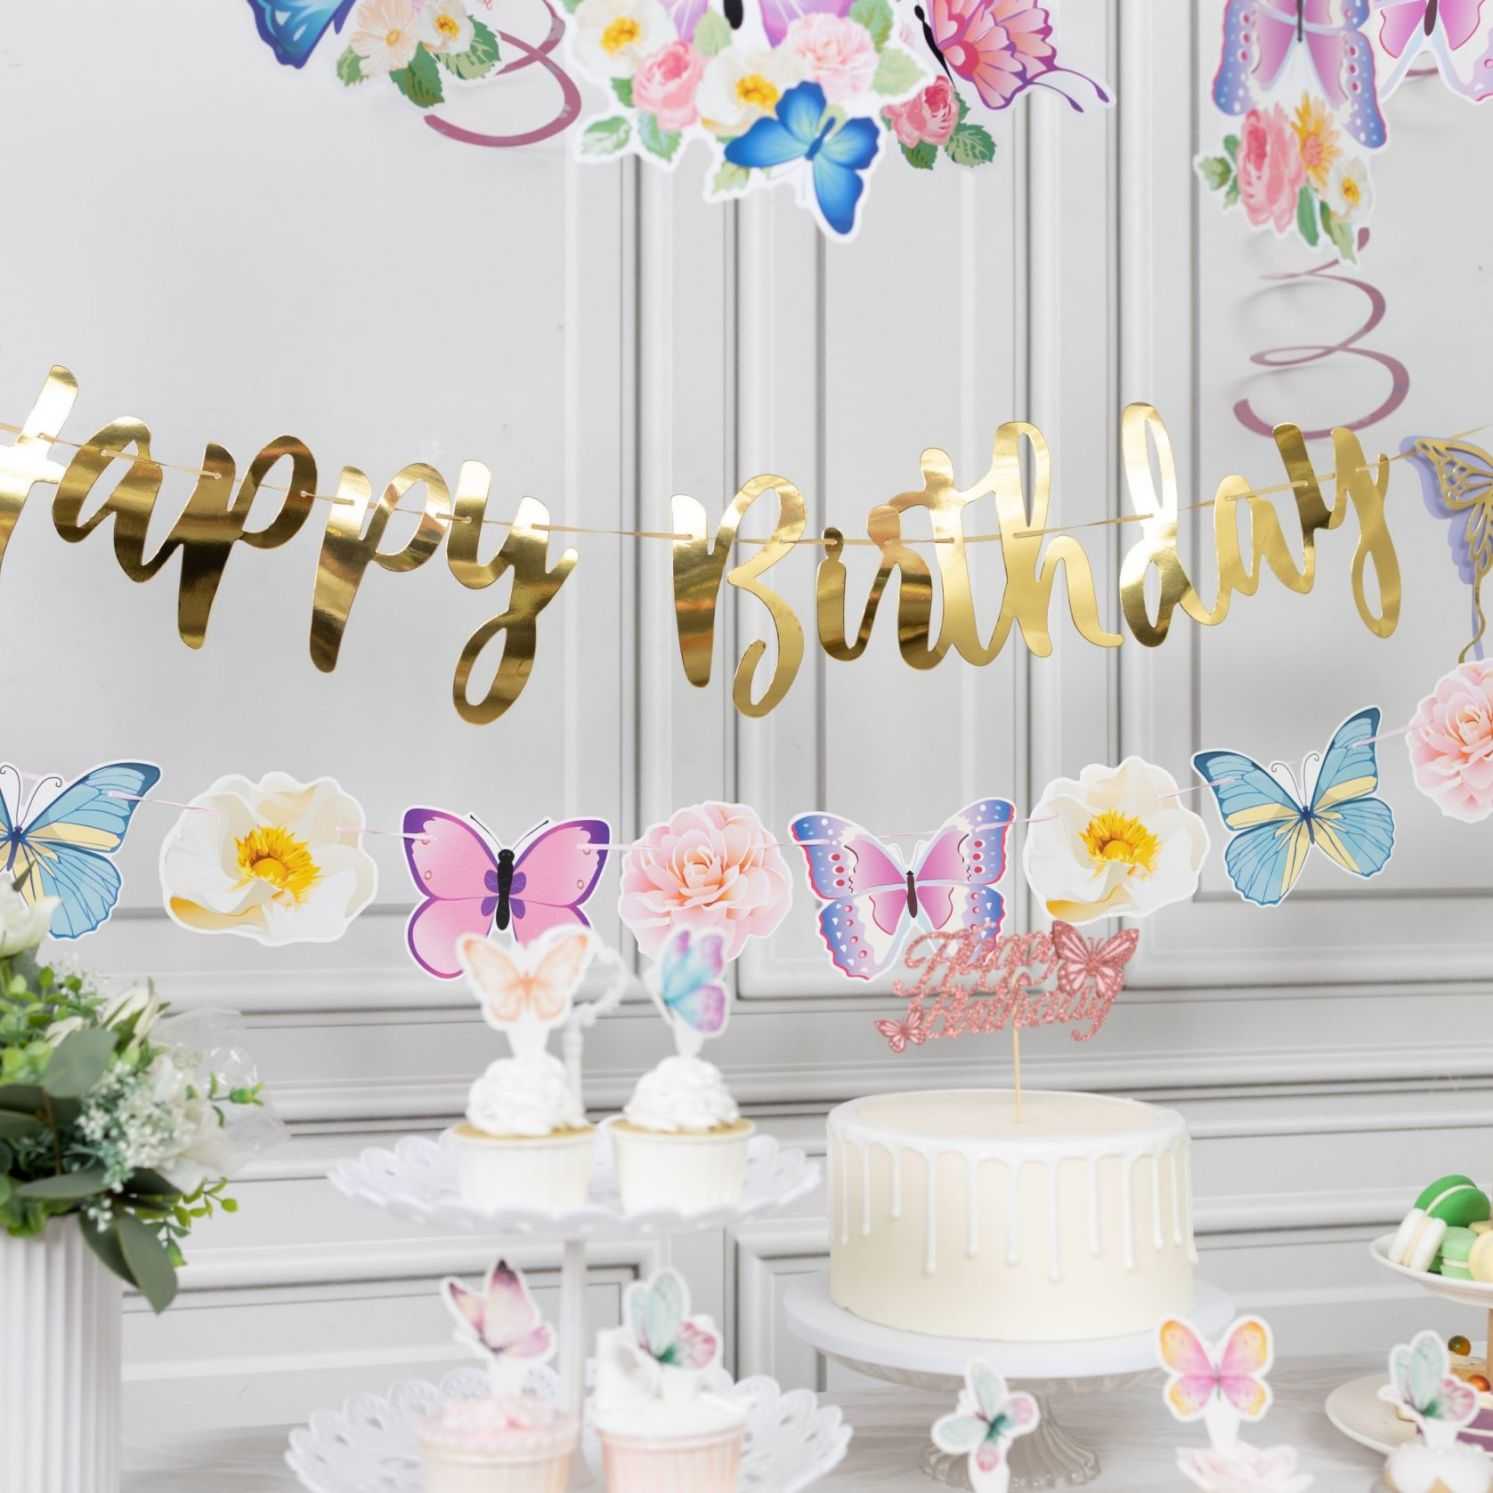 Butterfly themed birthday party decorations